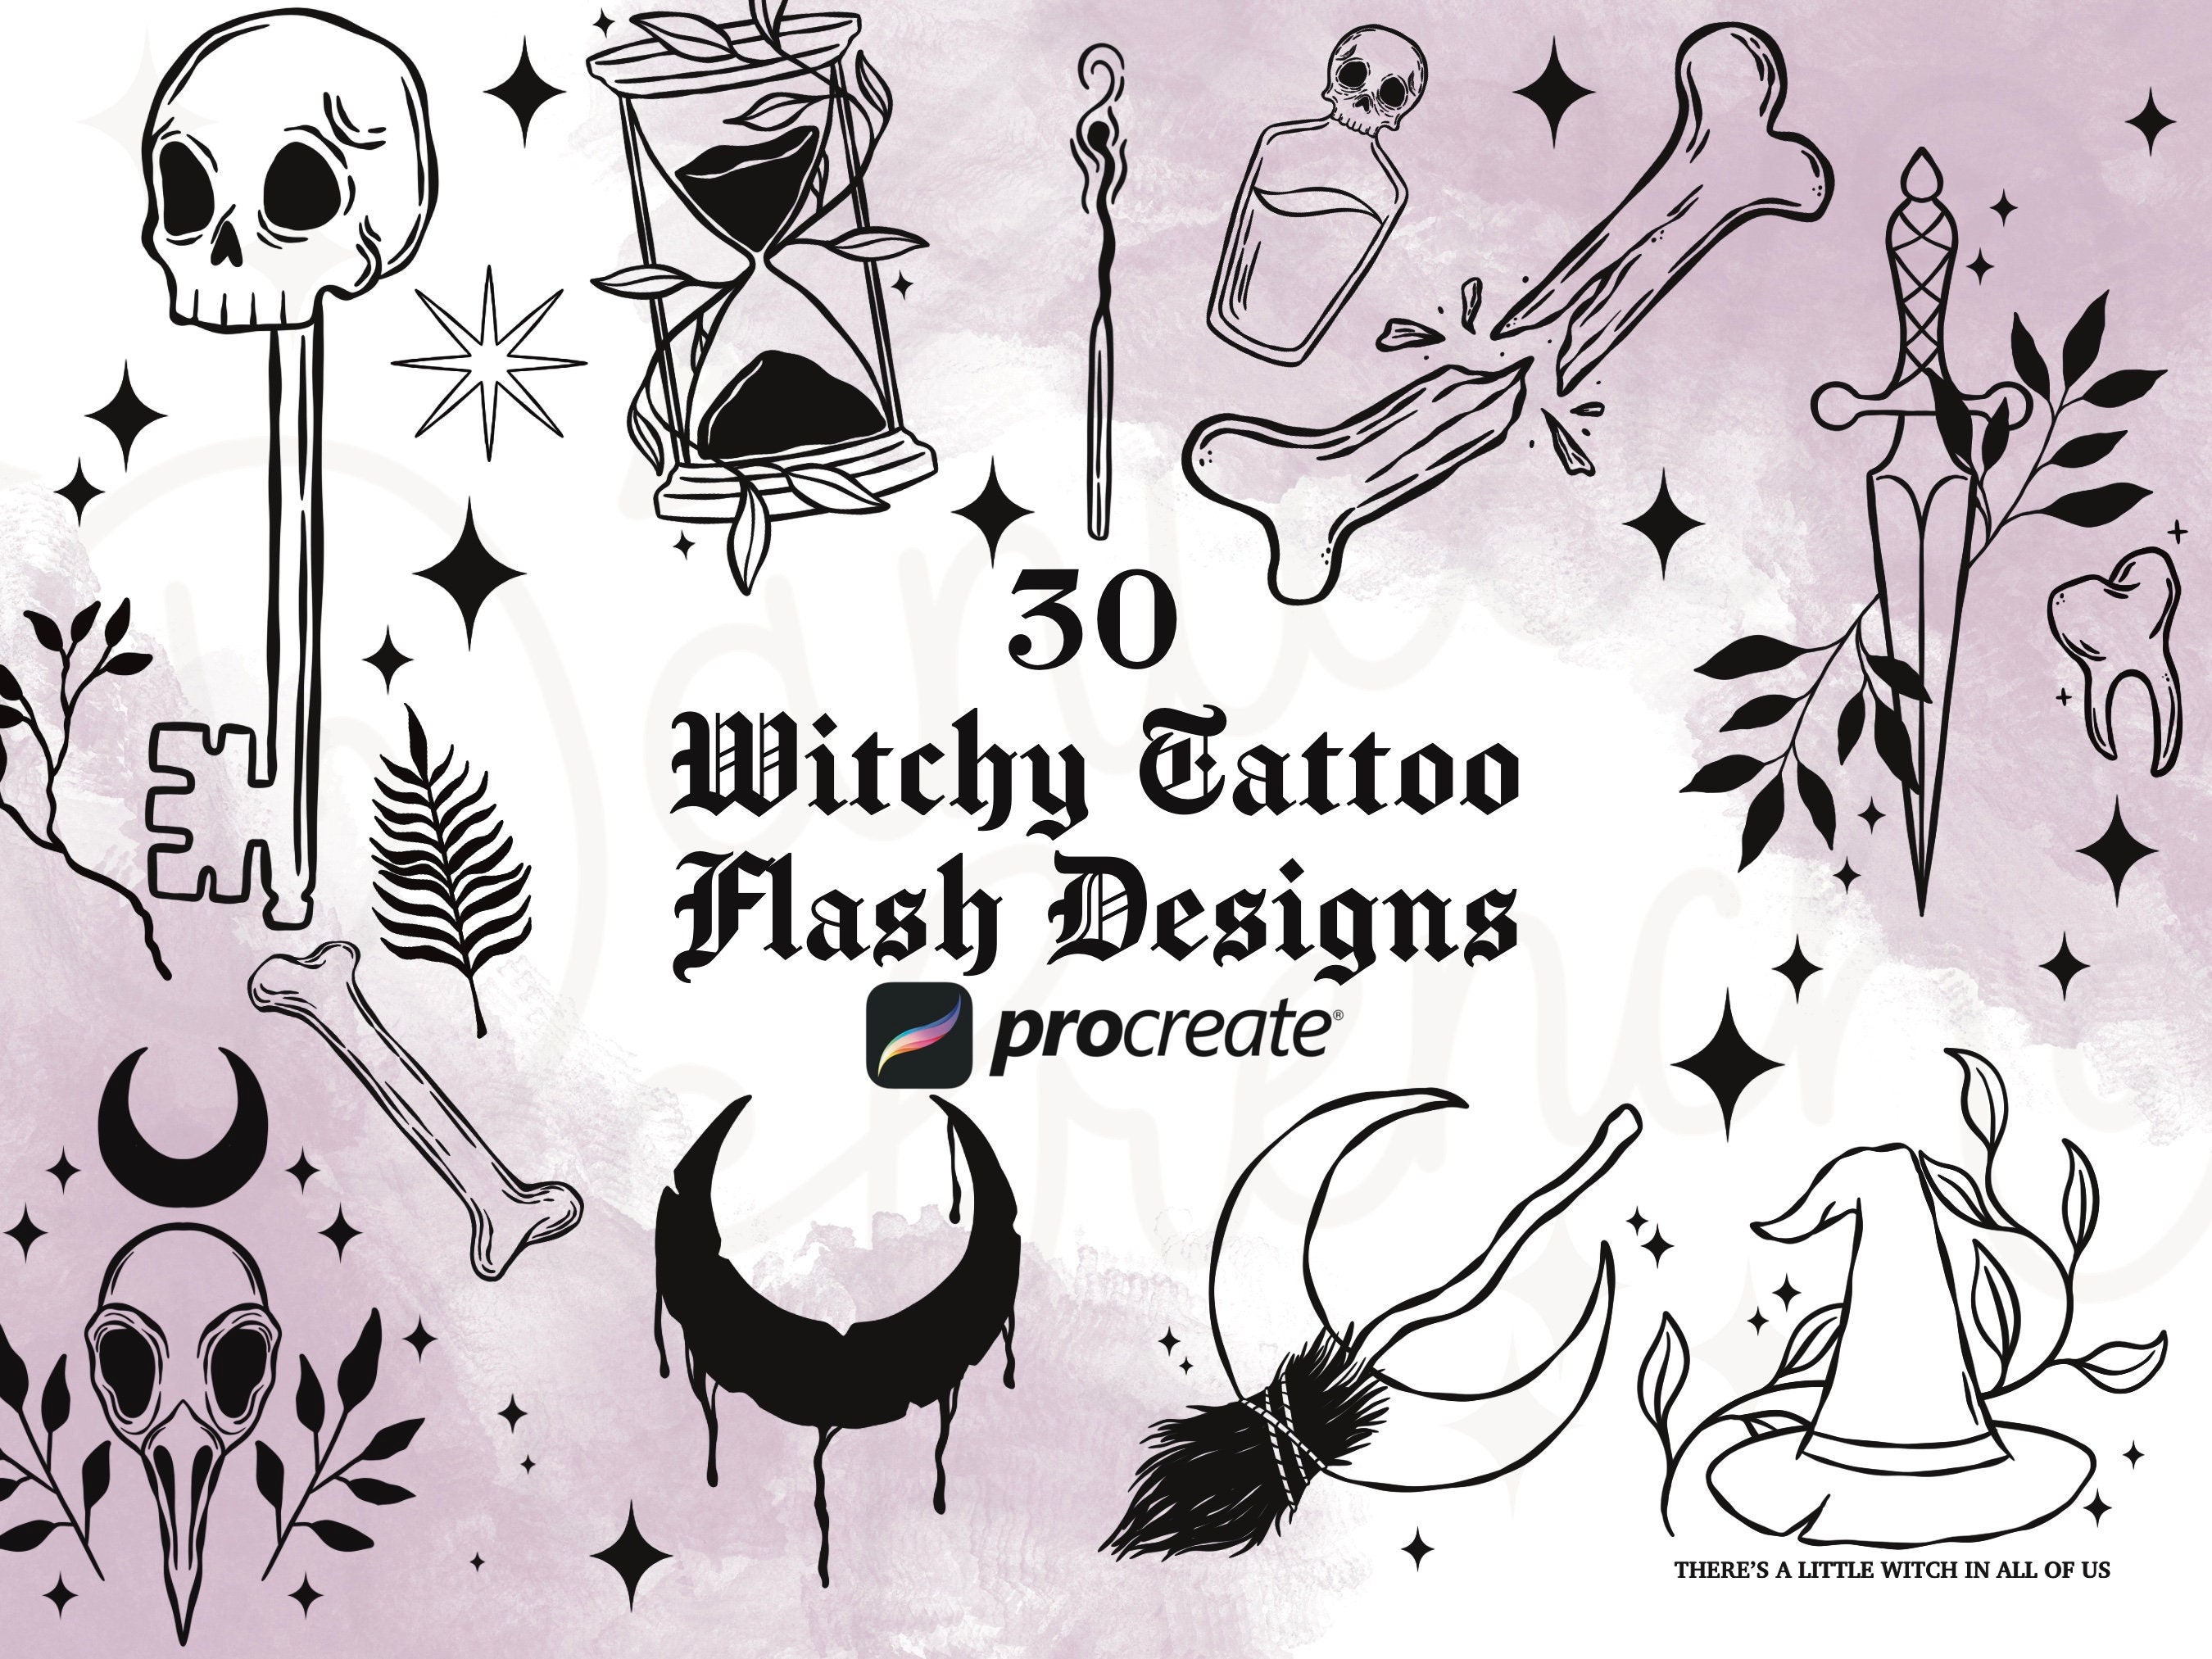 13 Witchy Tattoo Artists We Know Youll Love  Rebel CircusRebel Circus